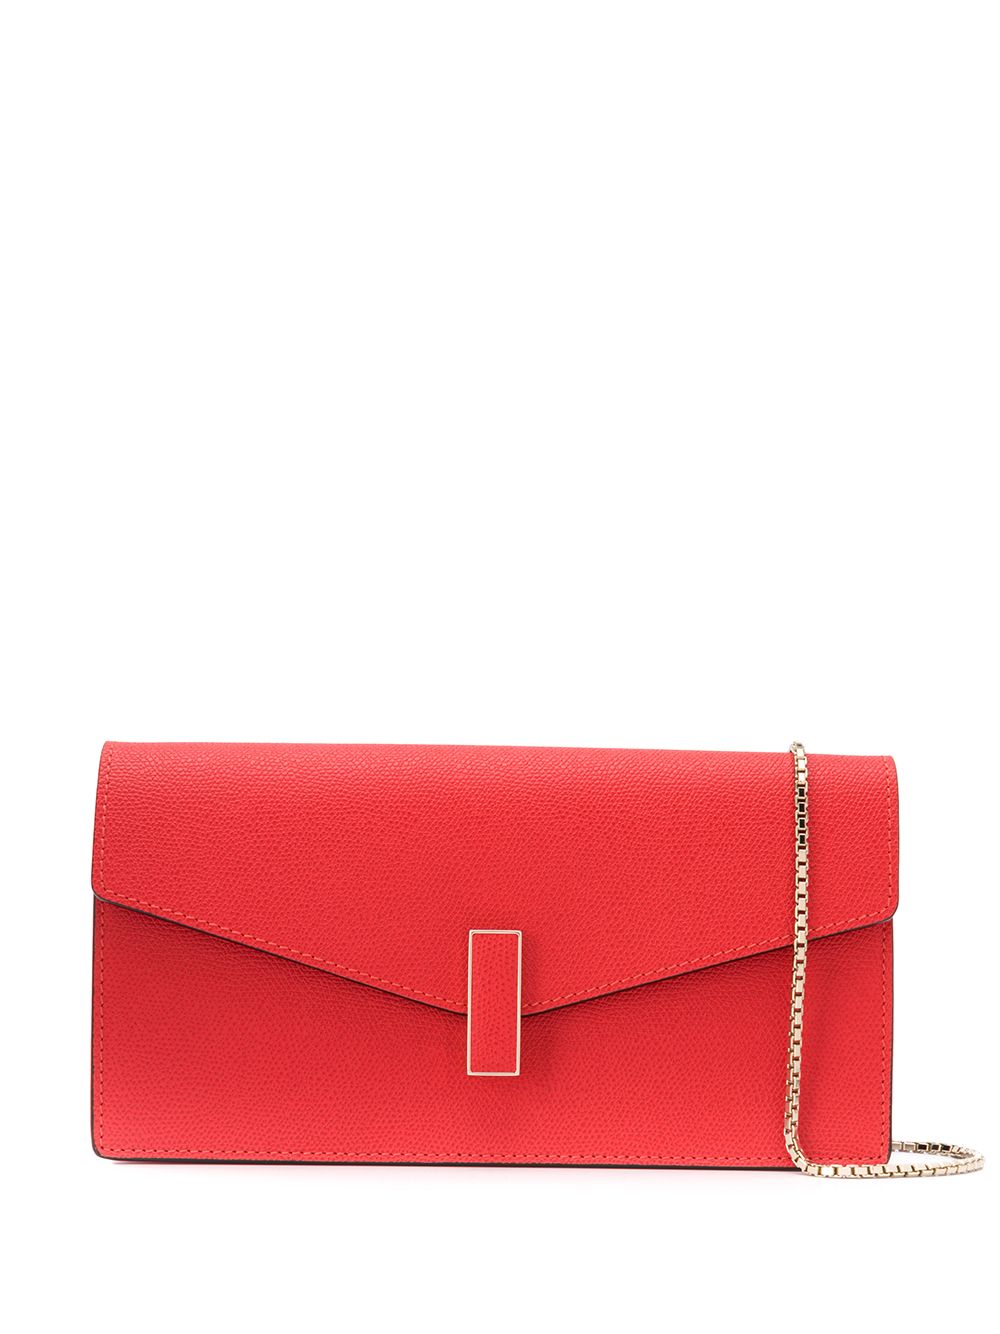 Valextra Iside Clutch Bag In Red